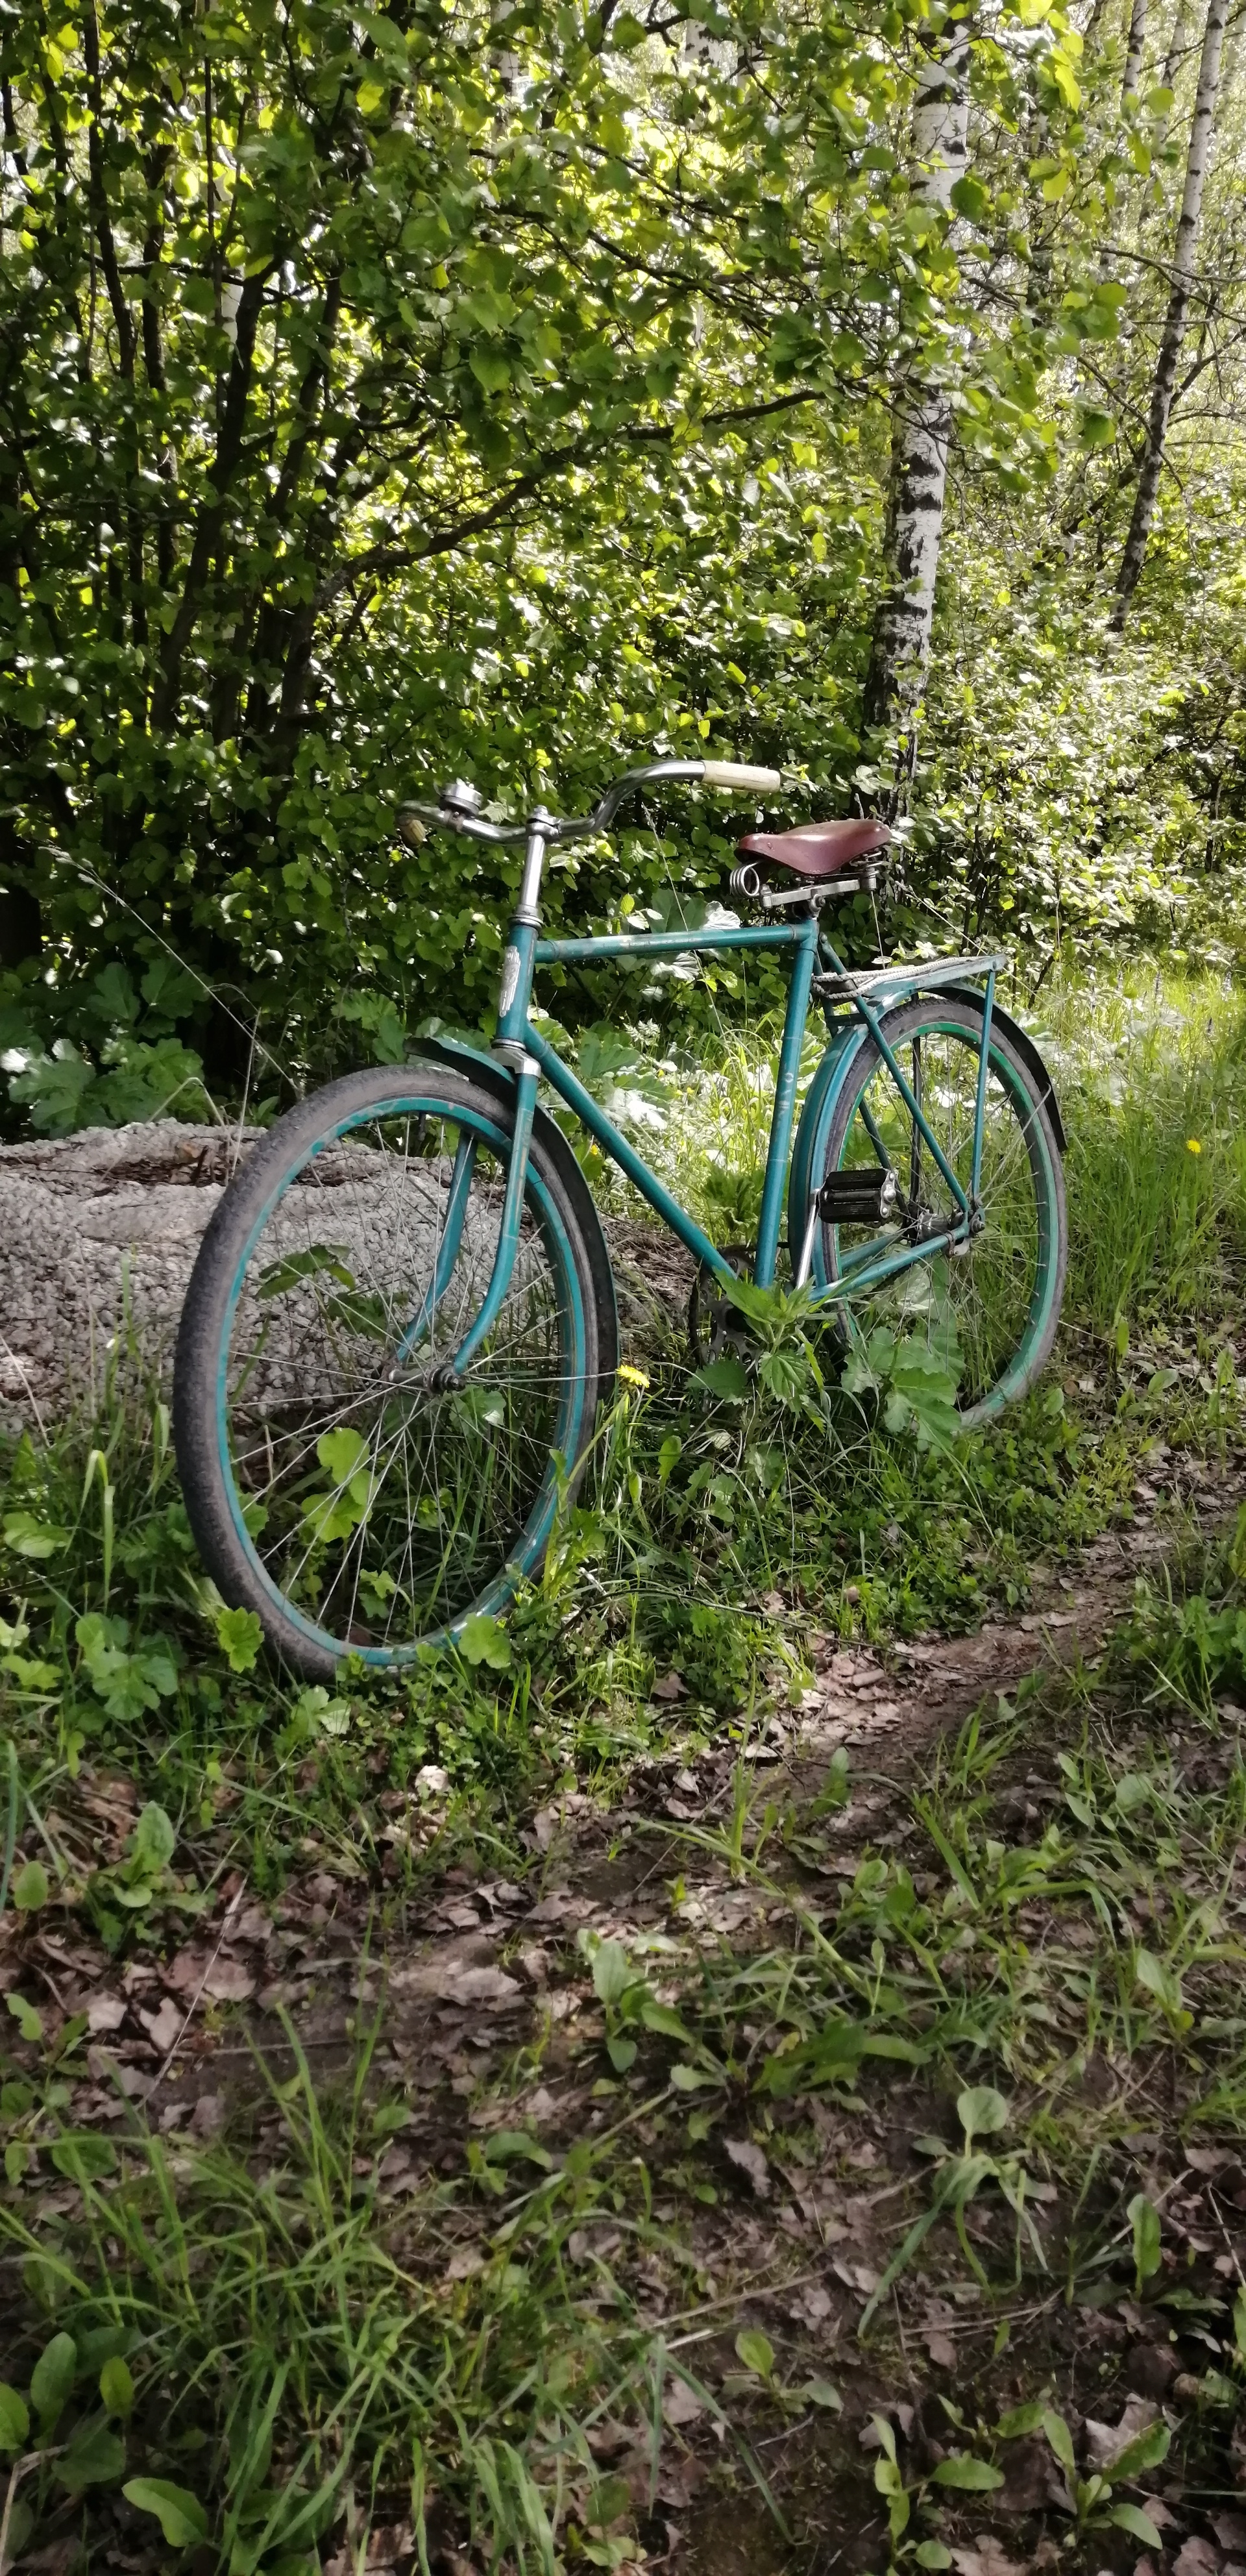 Elegant bicycle ZhVZ Desna Dorozhnaya from my collection, in near perfect condition. - Longpost, Cycling, Retro, A bike, My